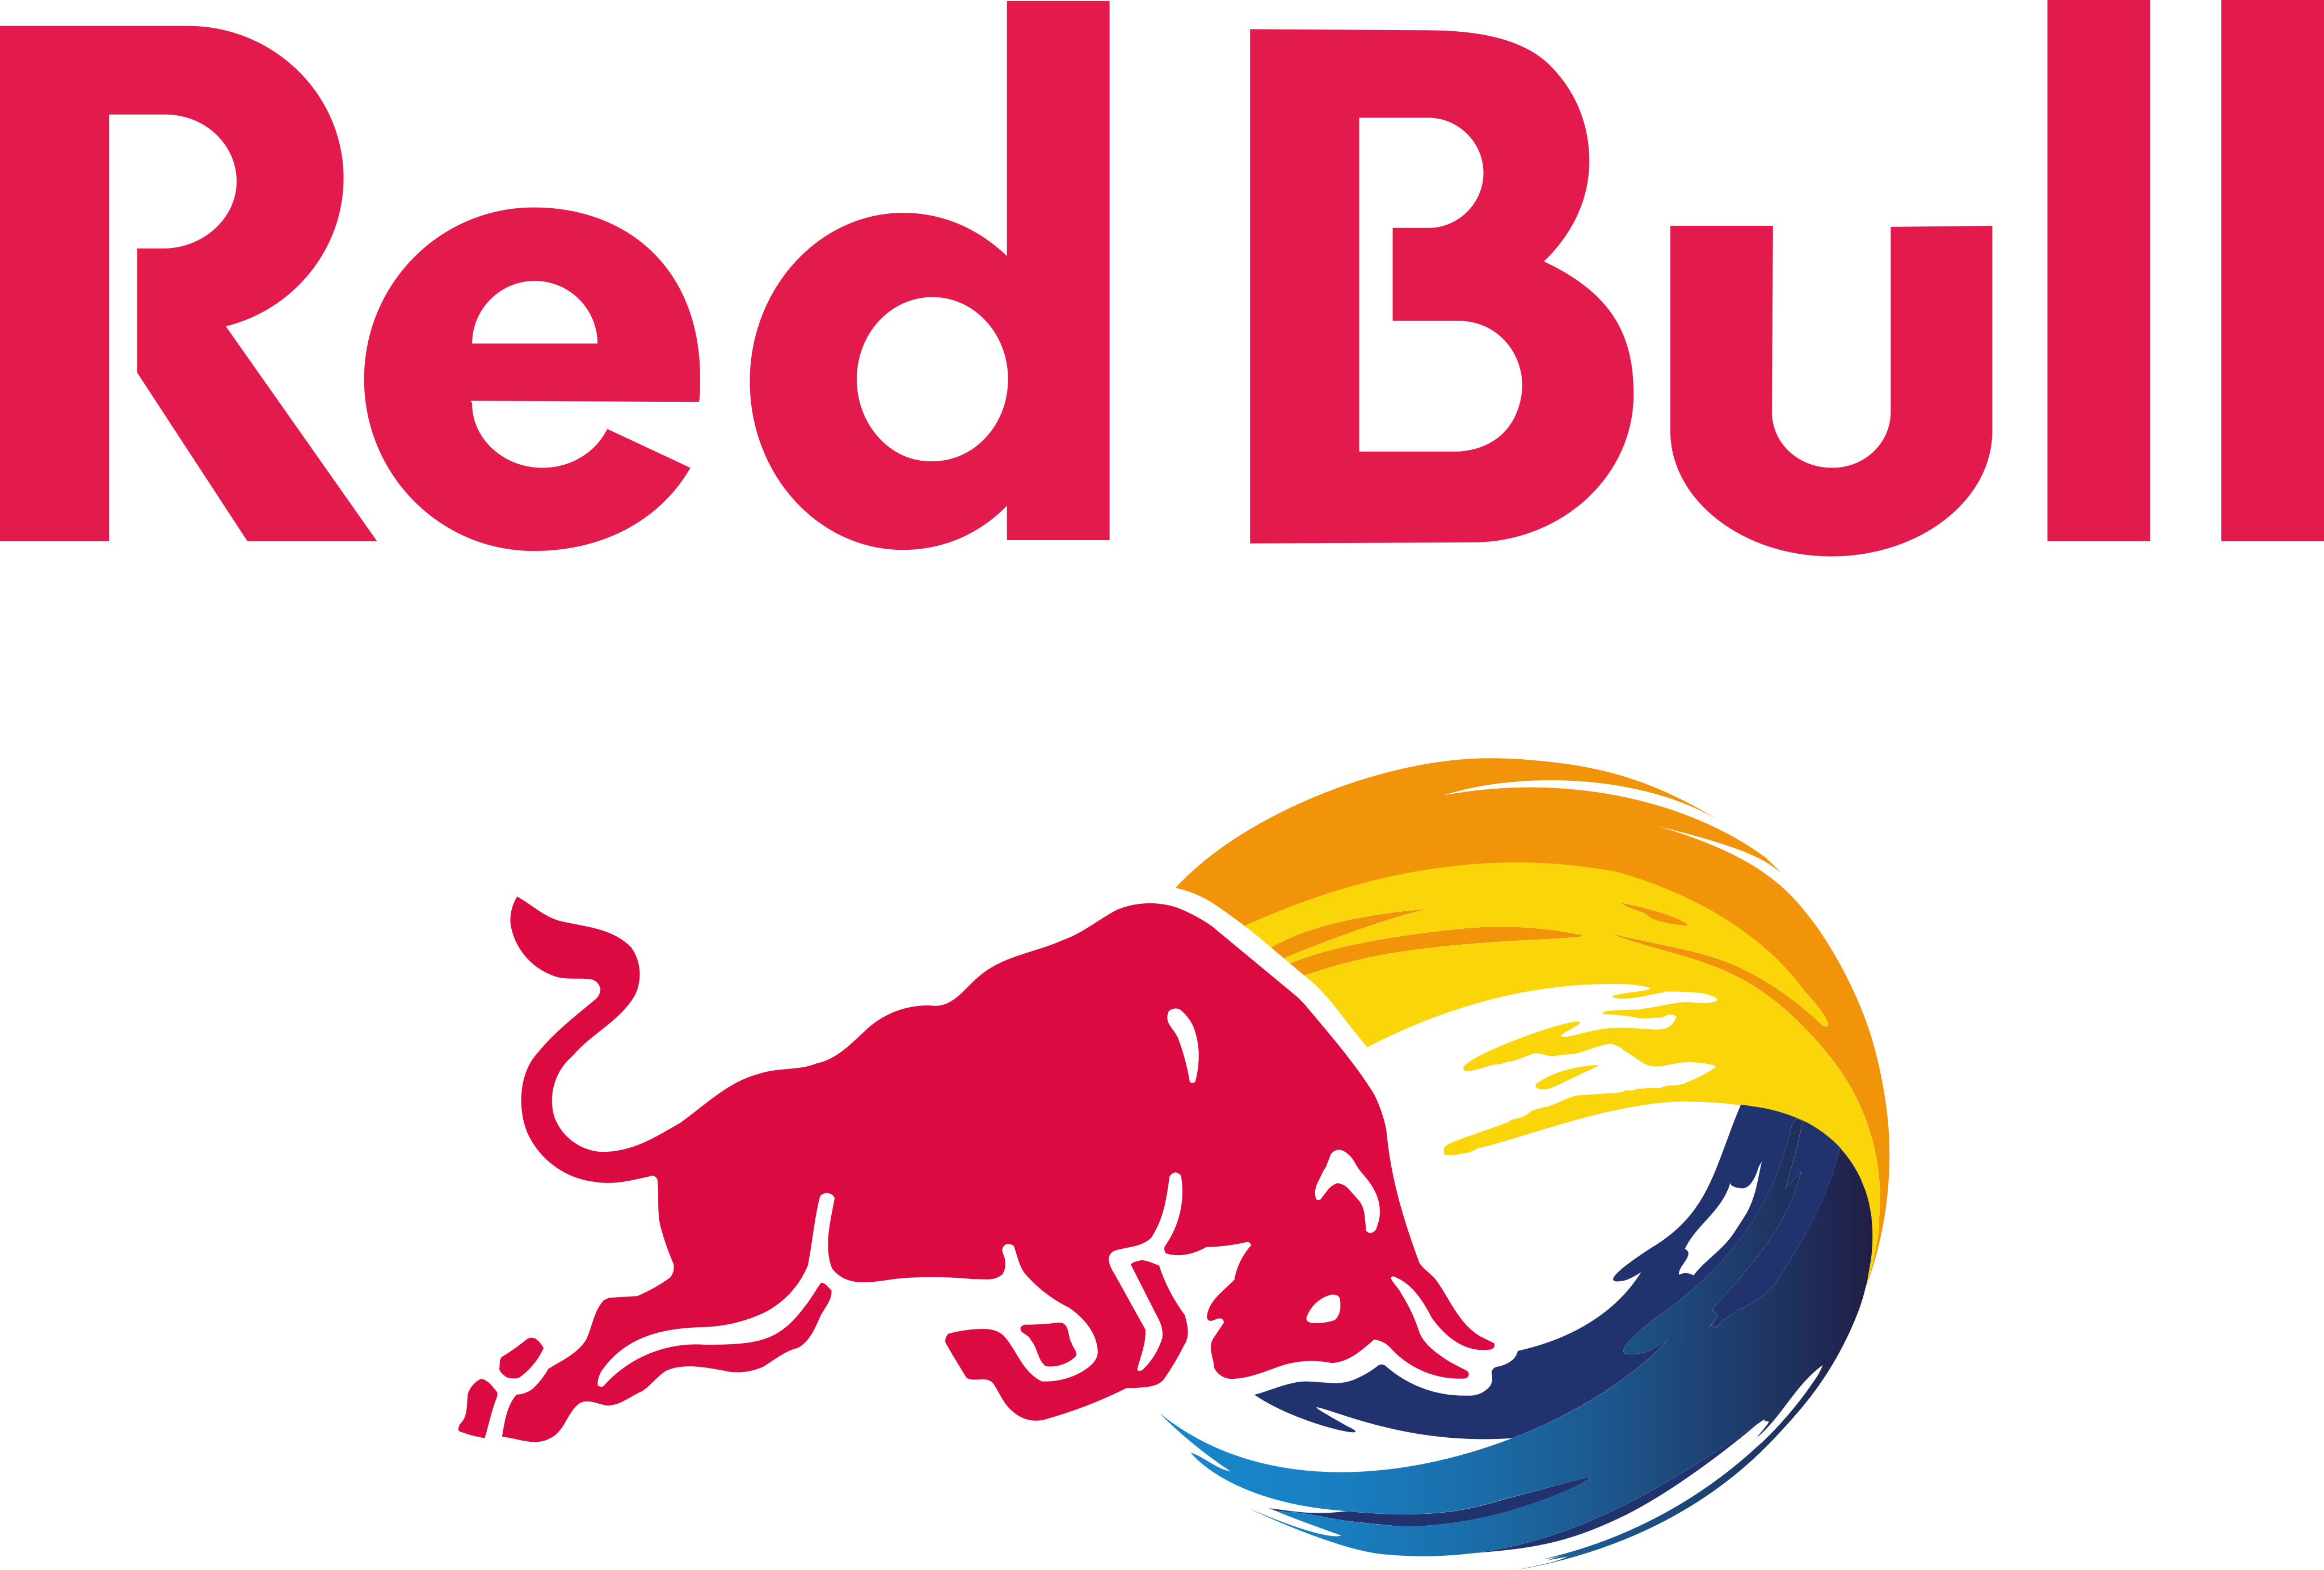 Red Bull Logo PNG Clipart